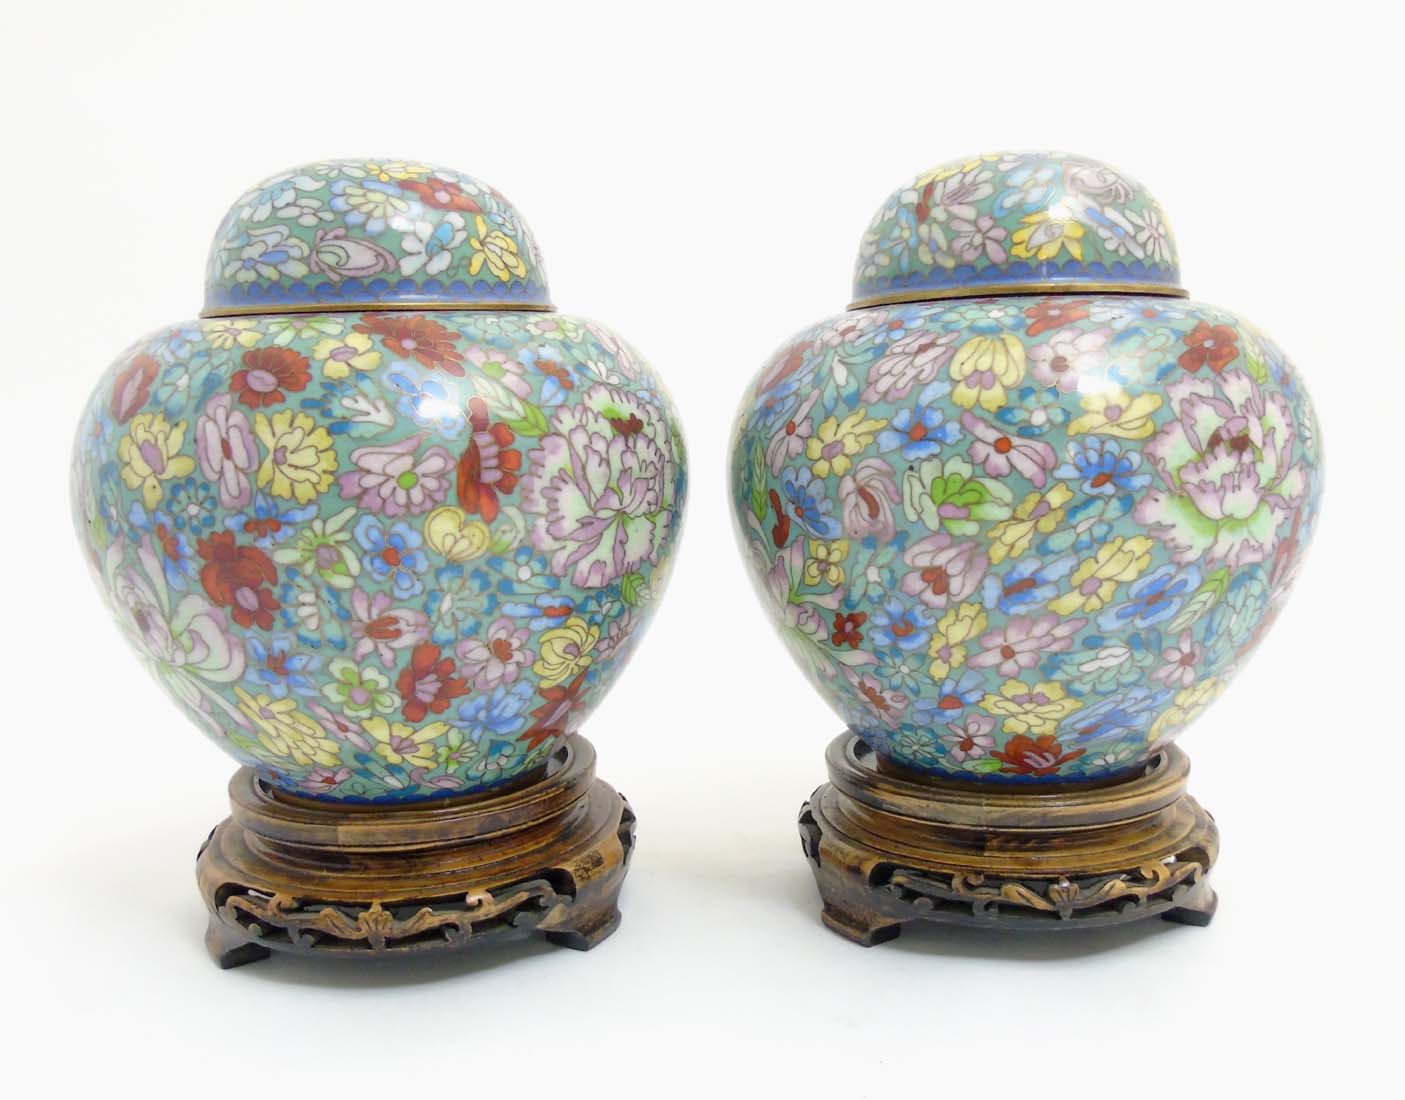 A pair of cloisonne gilt brass Ginger jars on stands with floral decoration. - Image 3 of 9